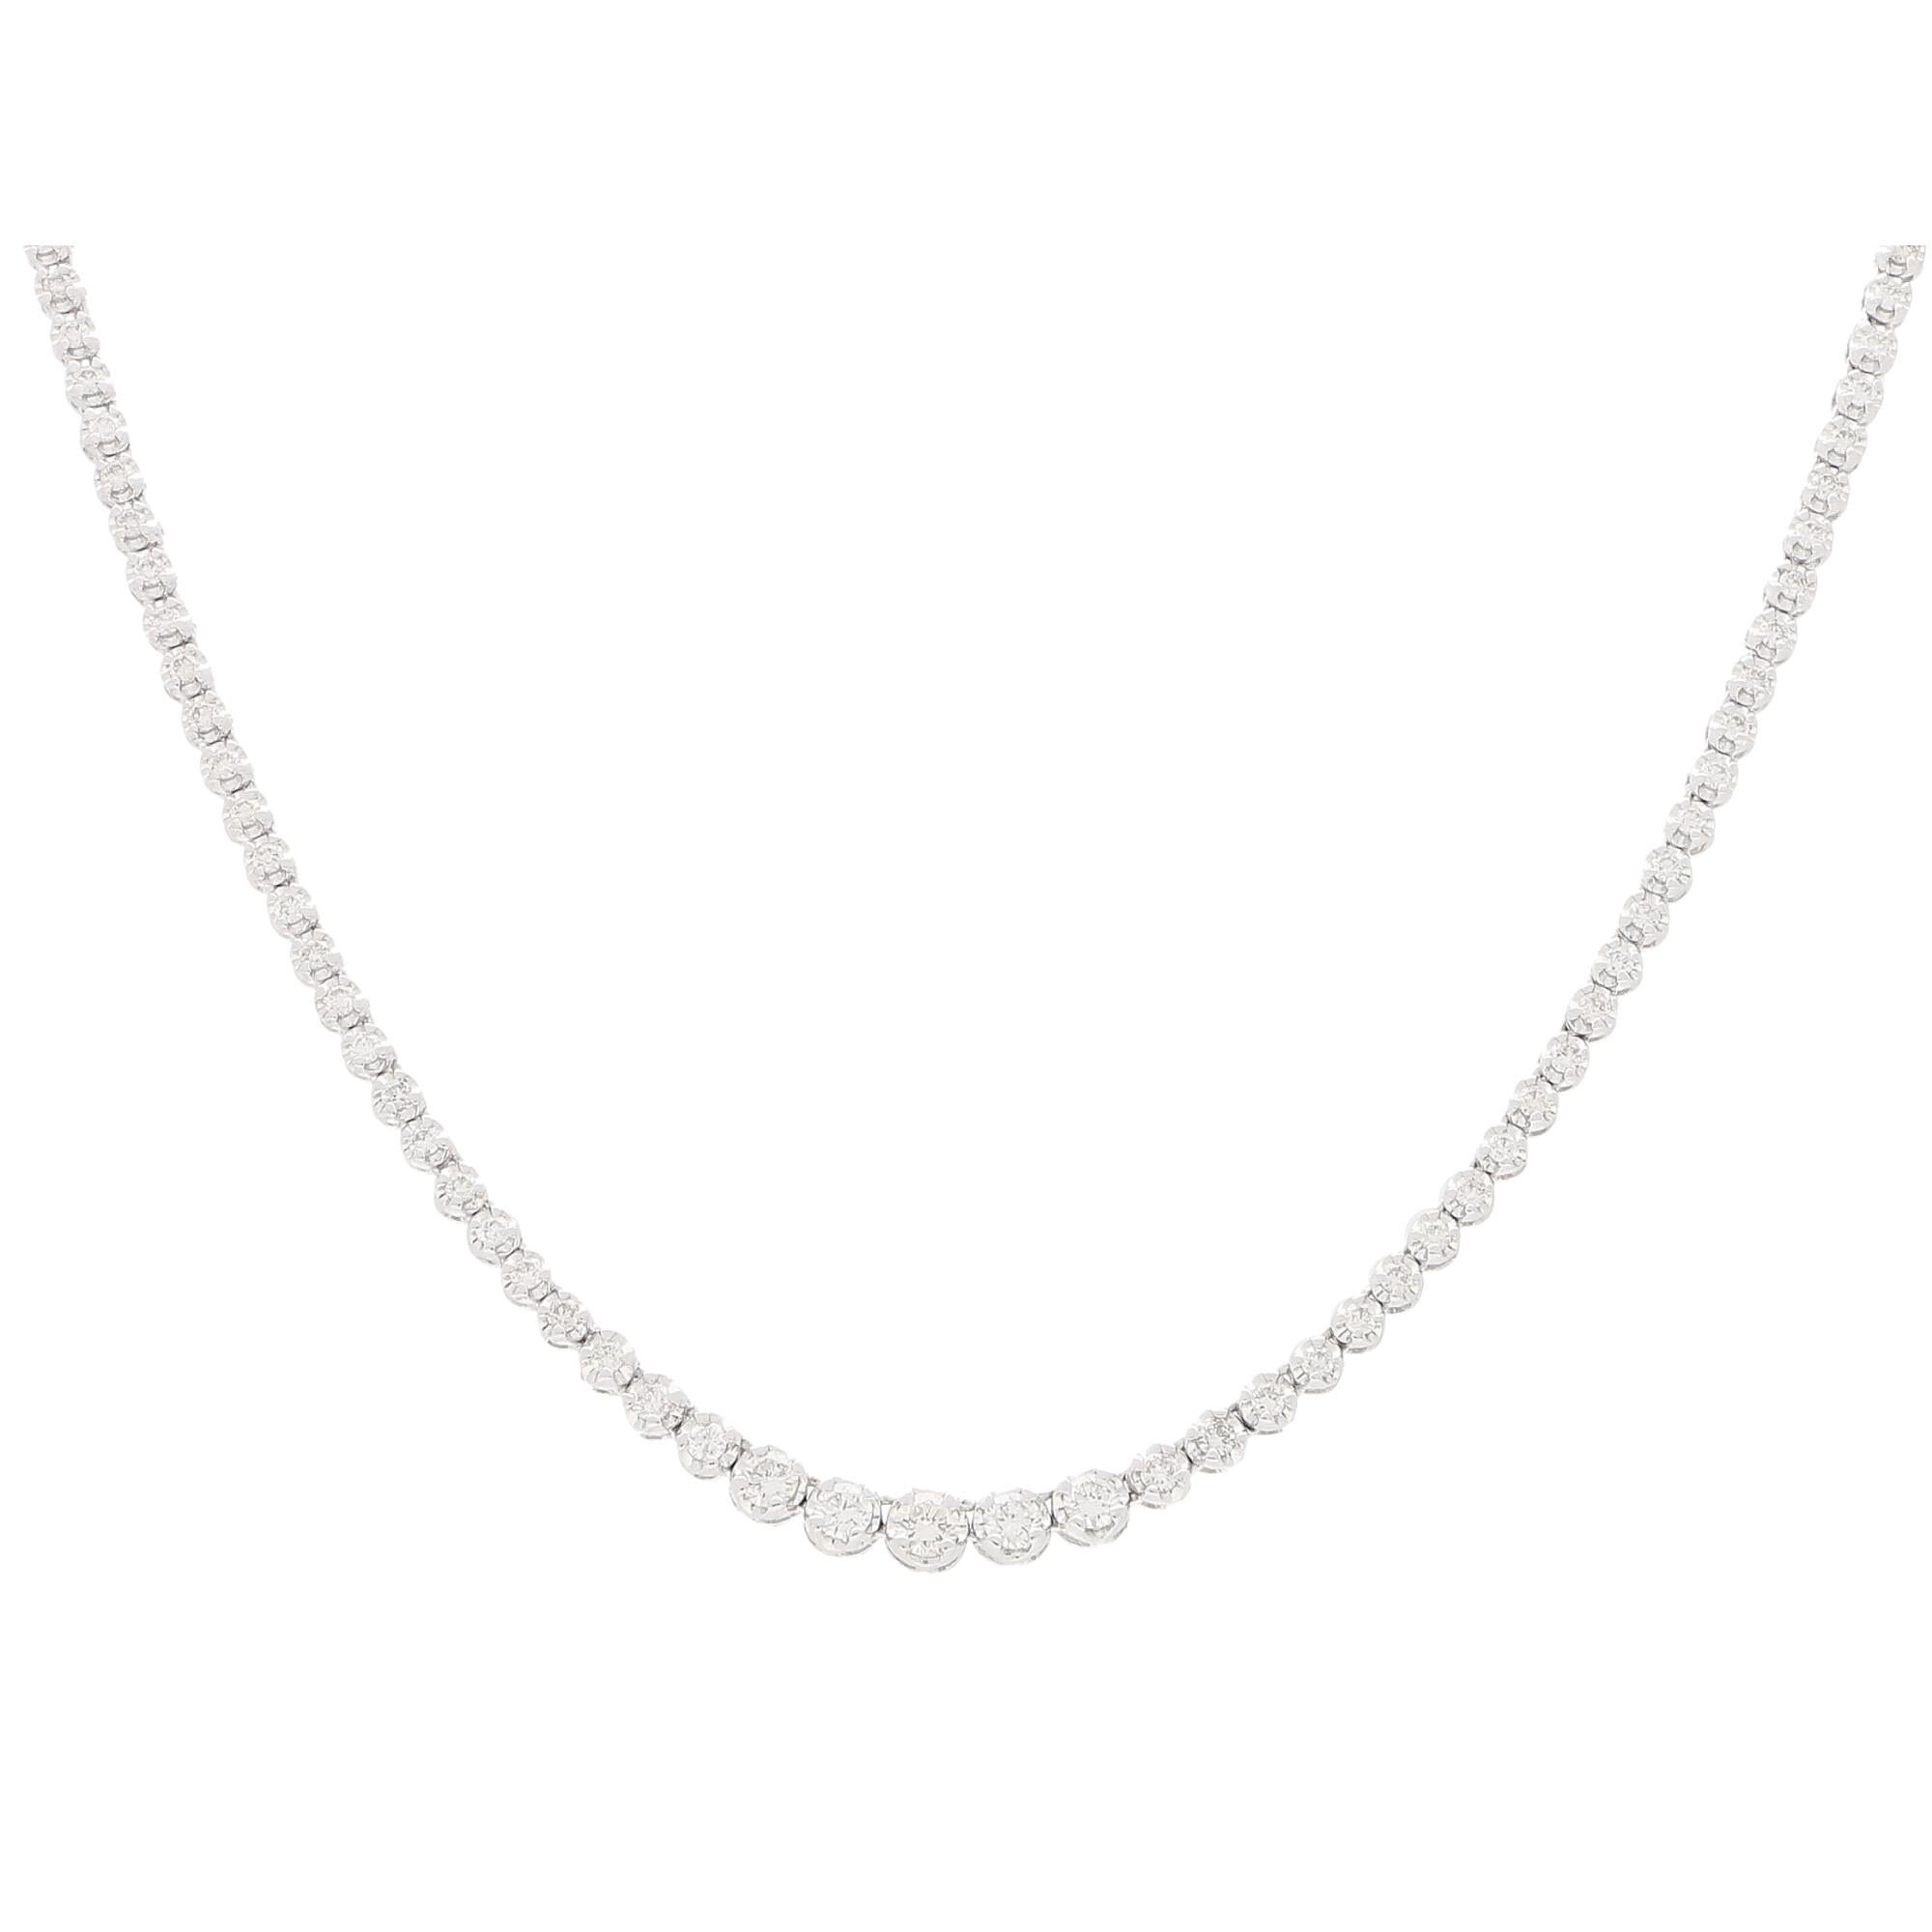 A beautiful diamond riviere necklace set in 18k white gold.

The necklace is composed of a staggering total of 137 diamonds all of which are individually four claw set in round articulated settings. 

Due to the design this necklace would be a